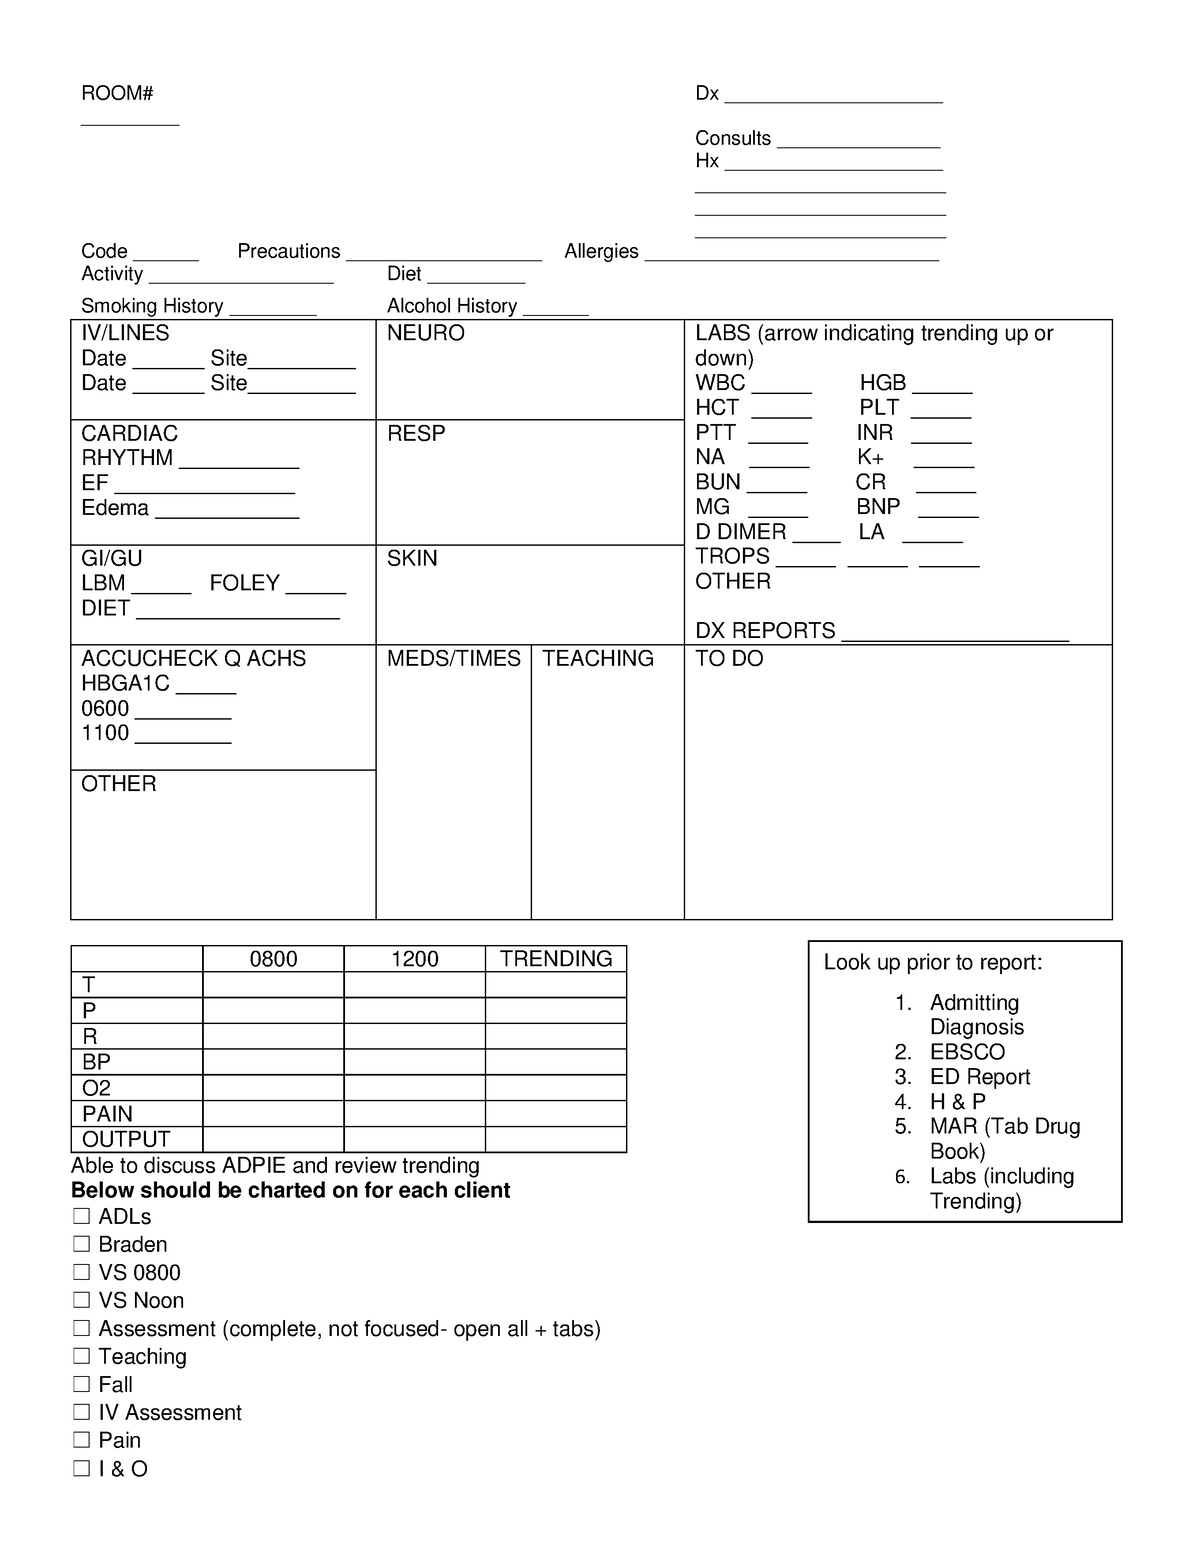 Report Sheet for each patient Leadership - ROOM# Dx ...